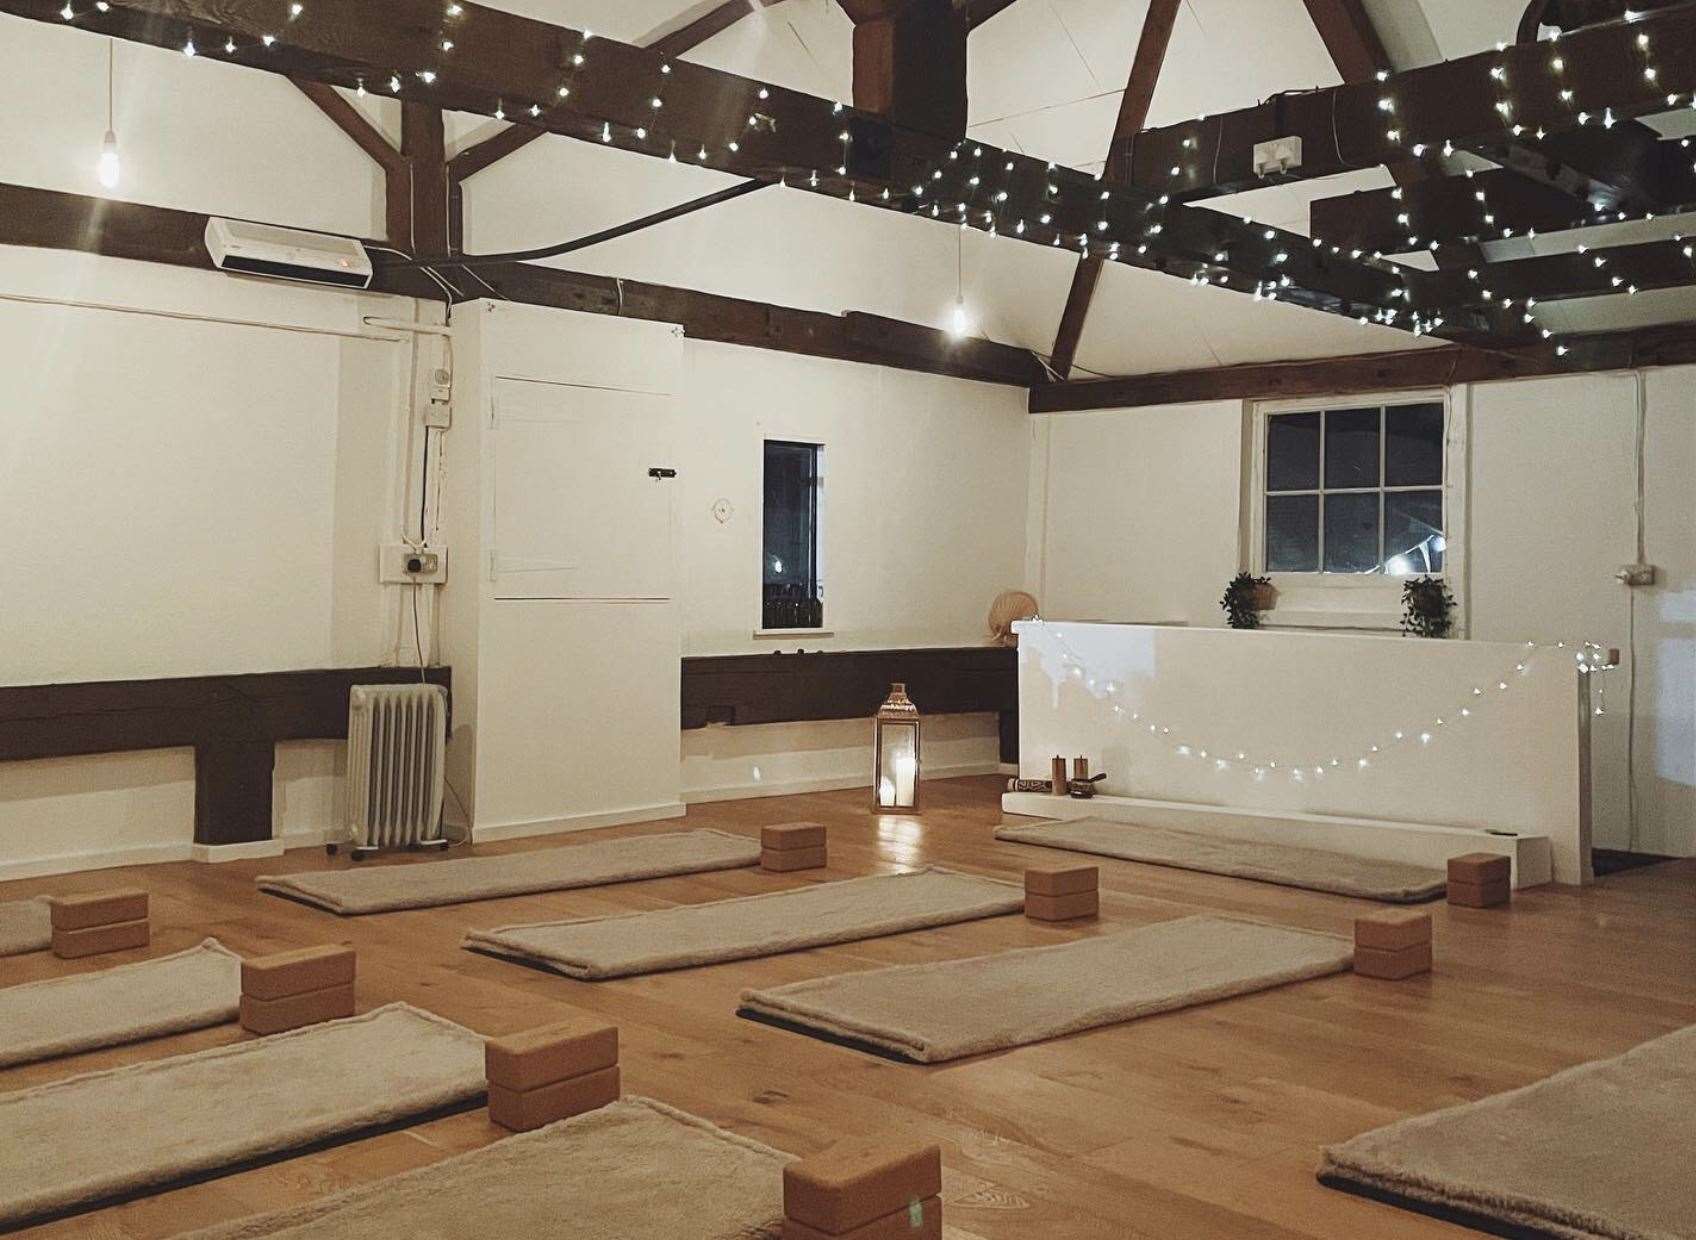 How the space at Actively Alive could look. Picture: Nicola Rowe